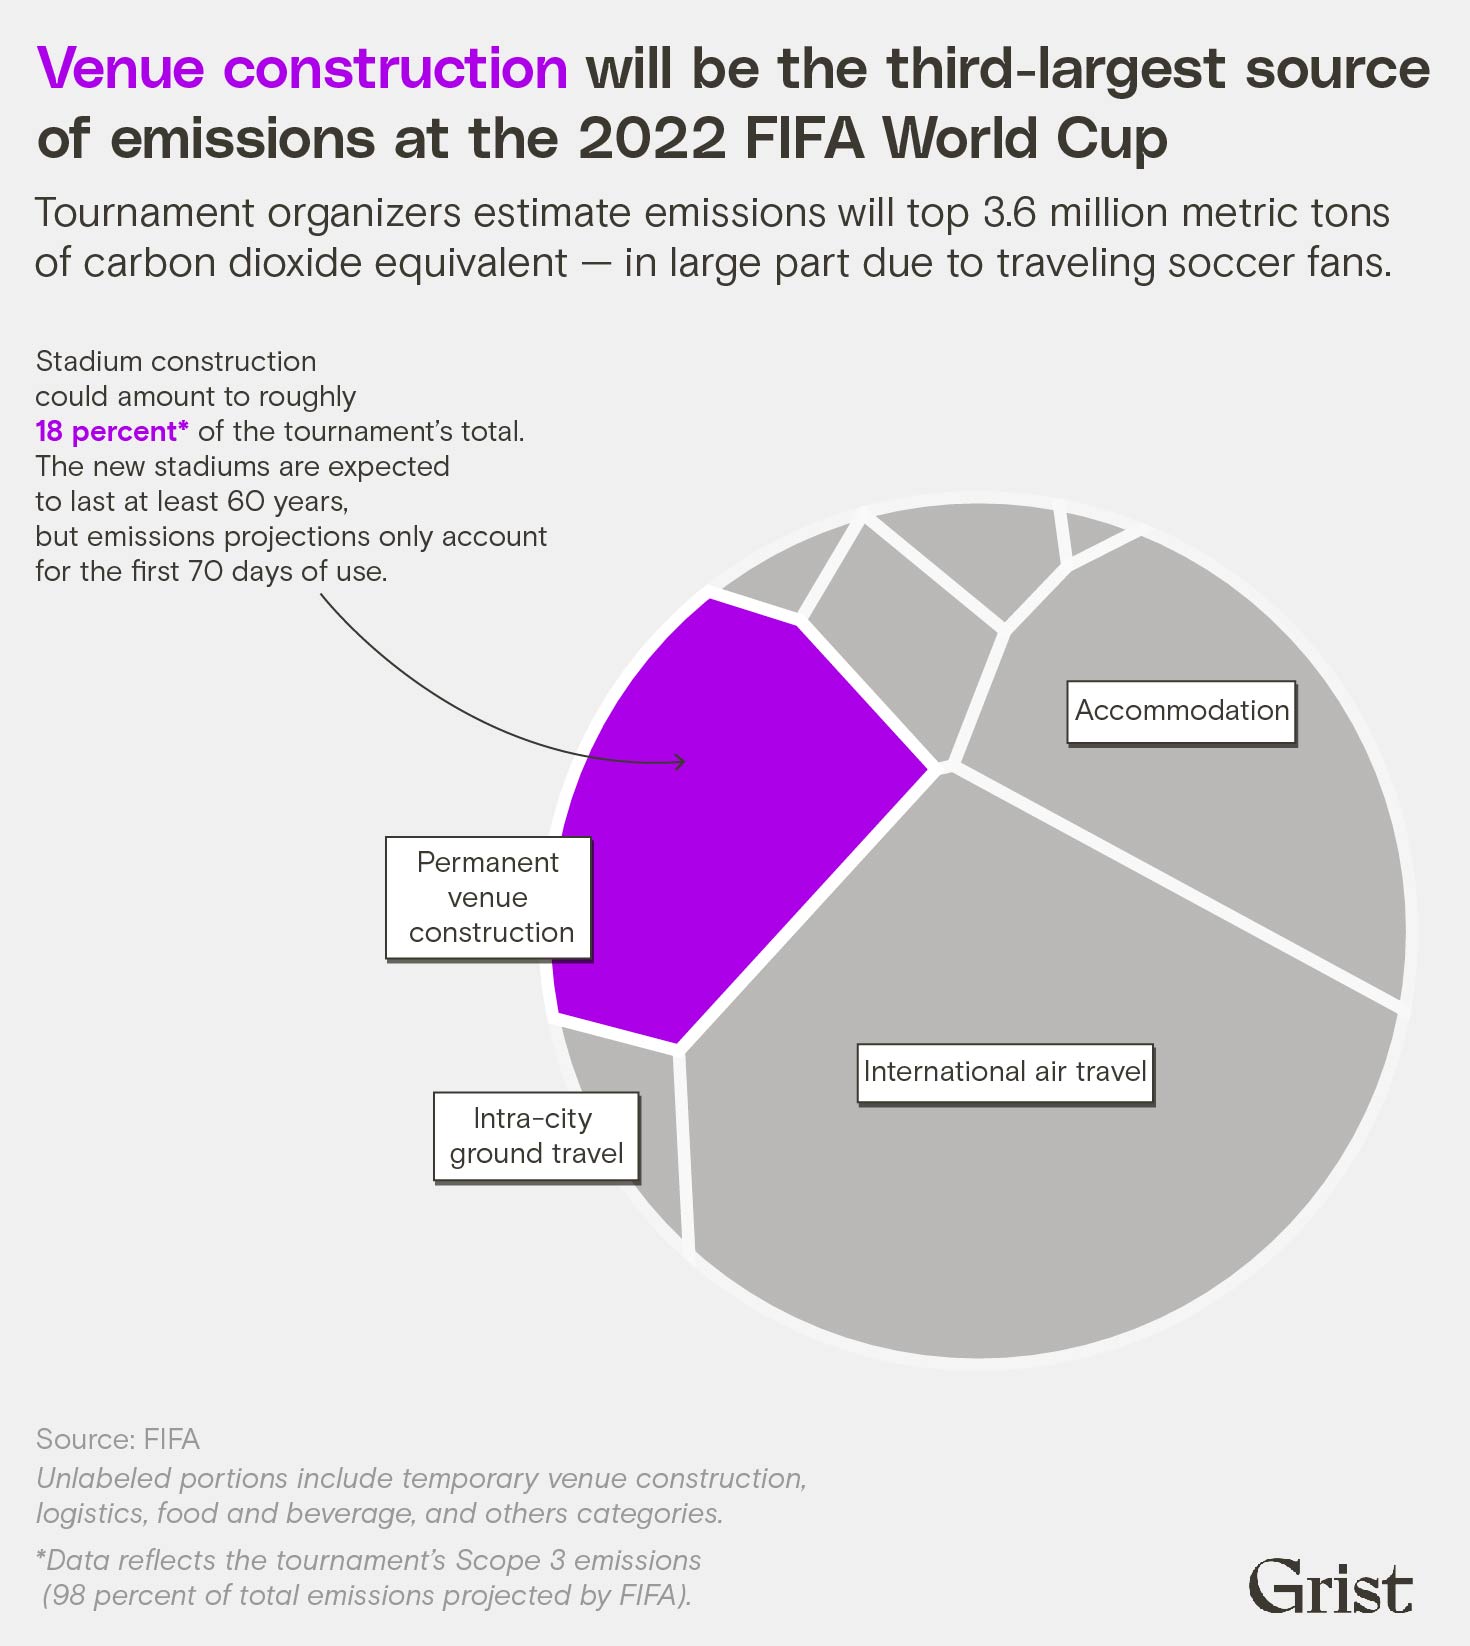 Voronoi diagram showing largest projected emissions categories for 2022 FIFA World Cup. Most emissions are due to traveling fans.